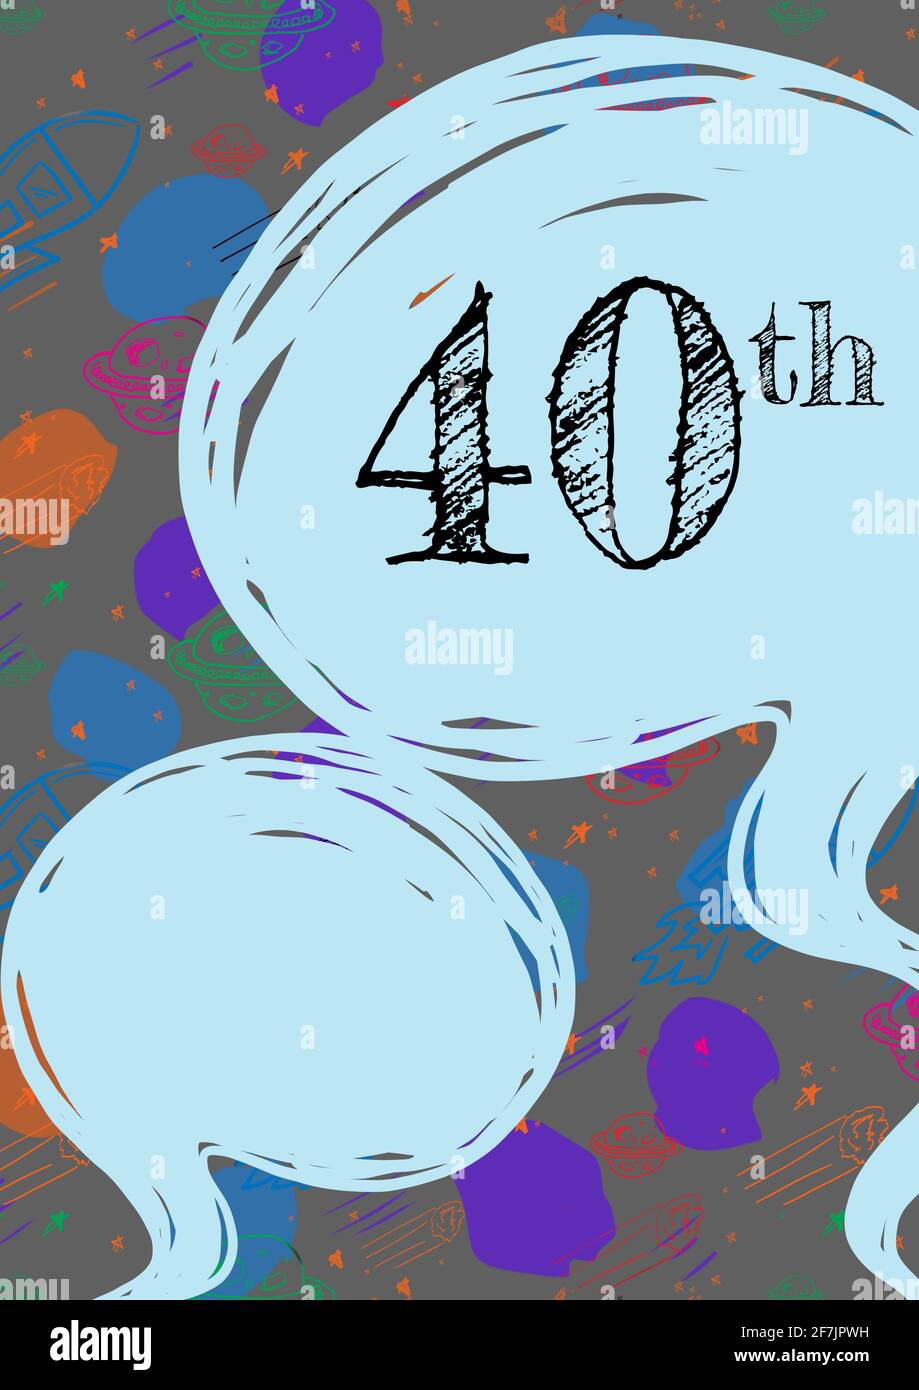 40th written in black in speech bubble on invite with empty speech bubble and painterly background Stock Photo